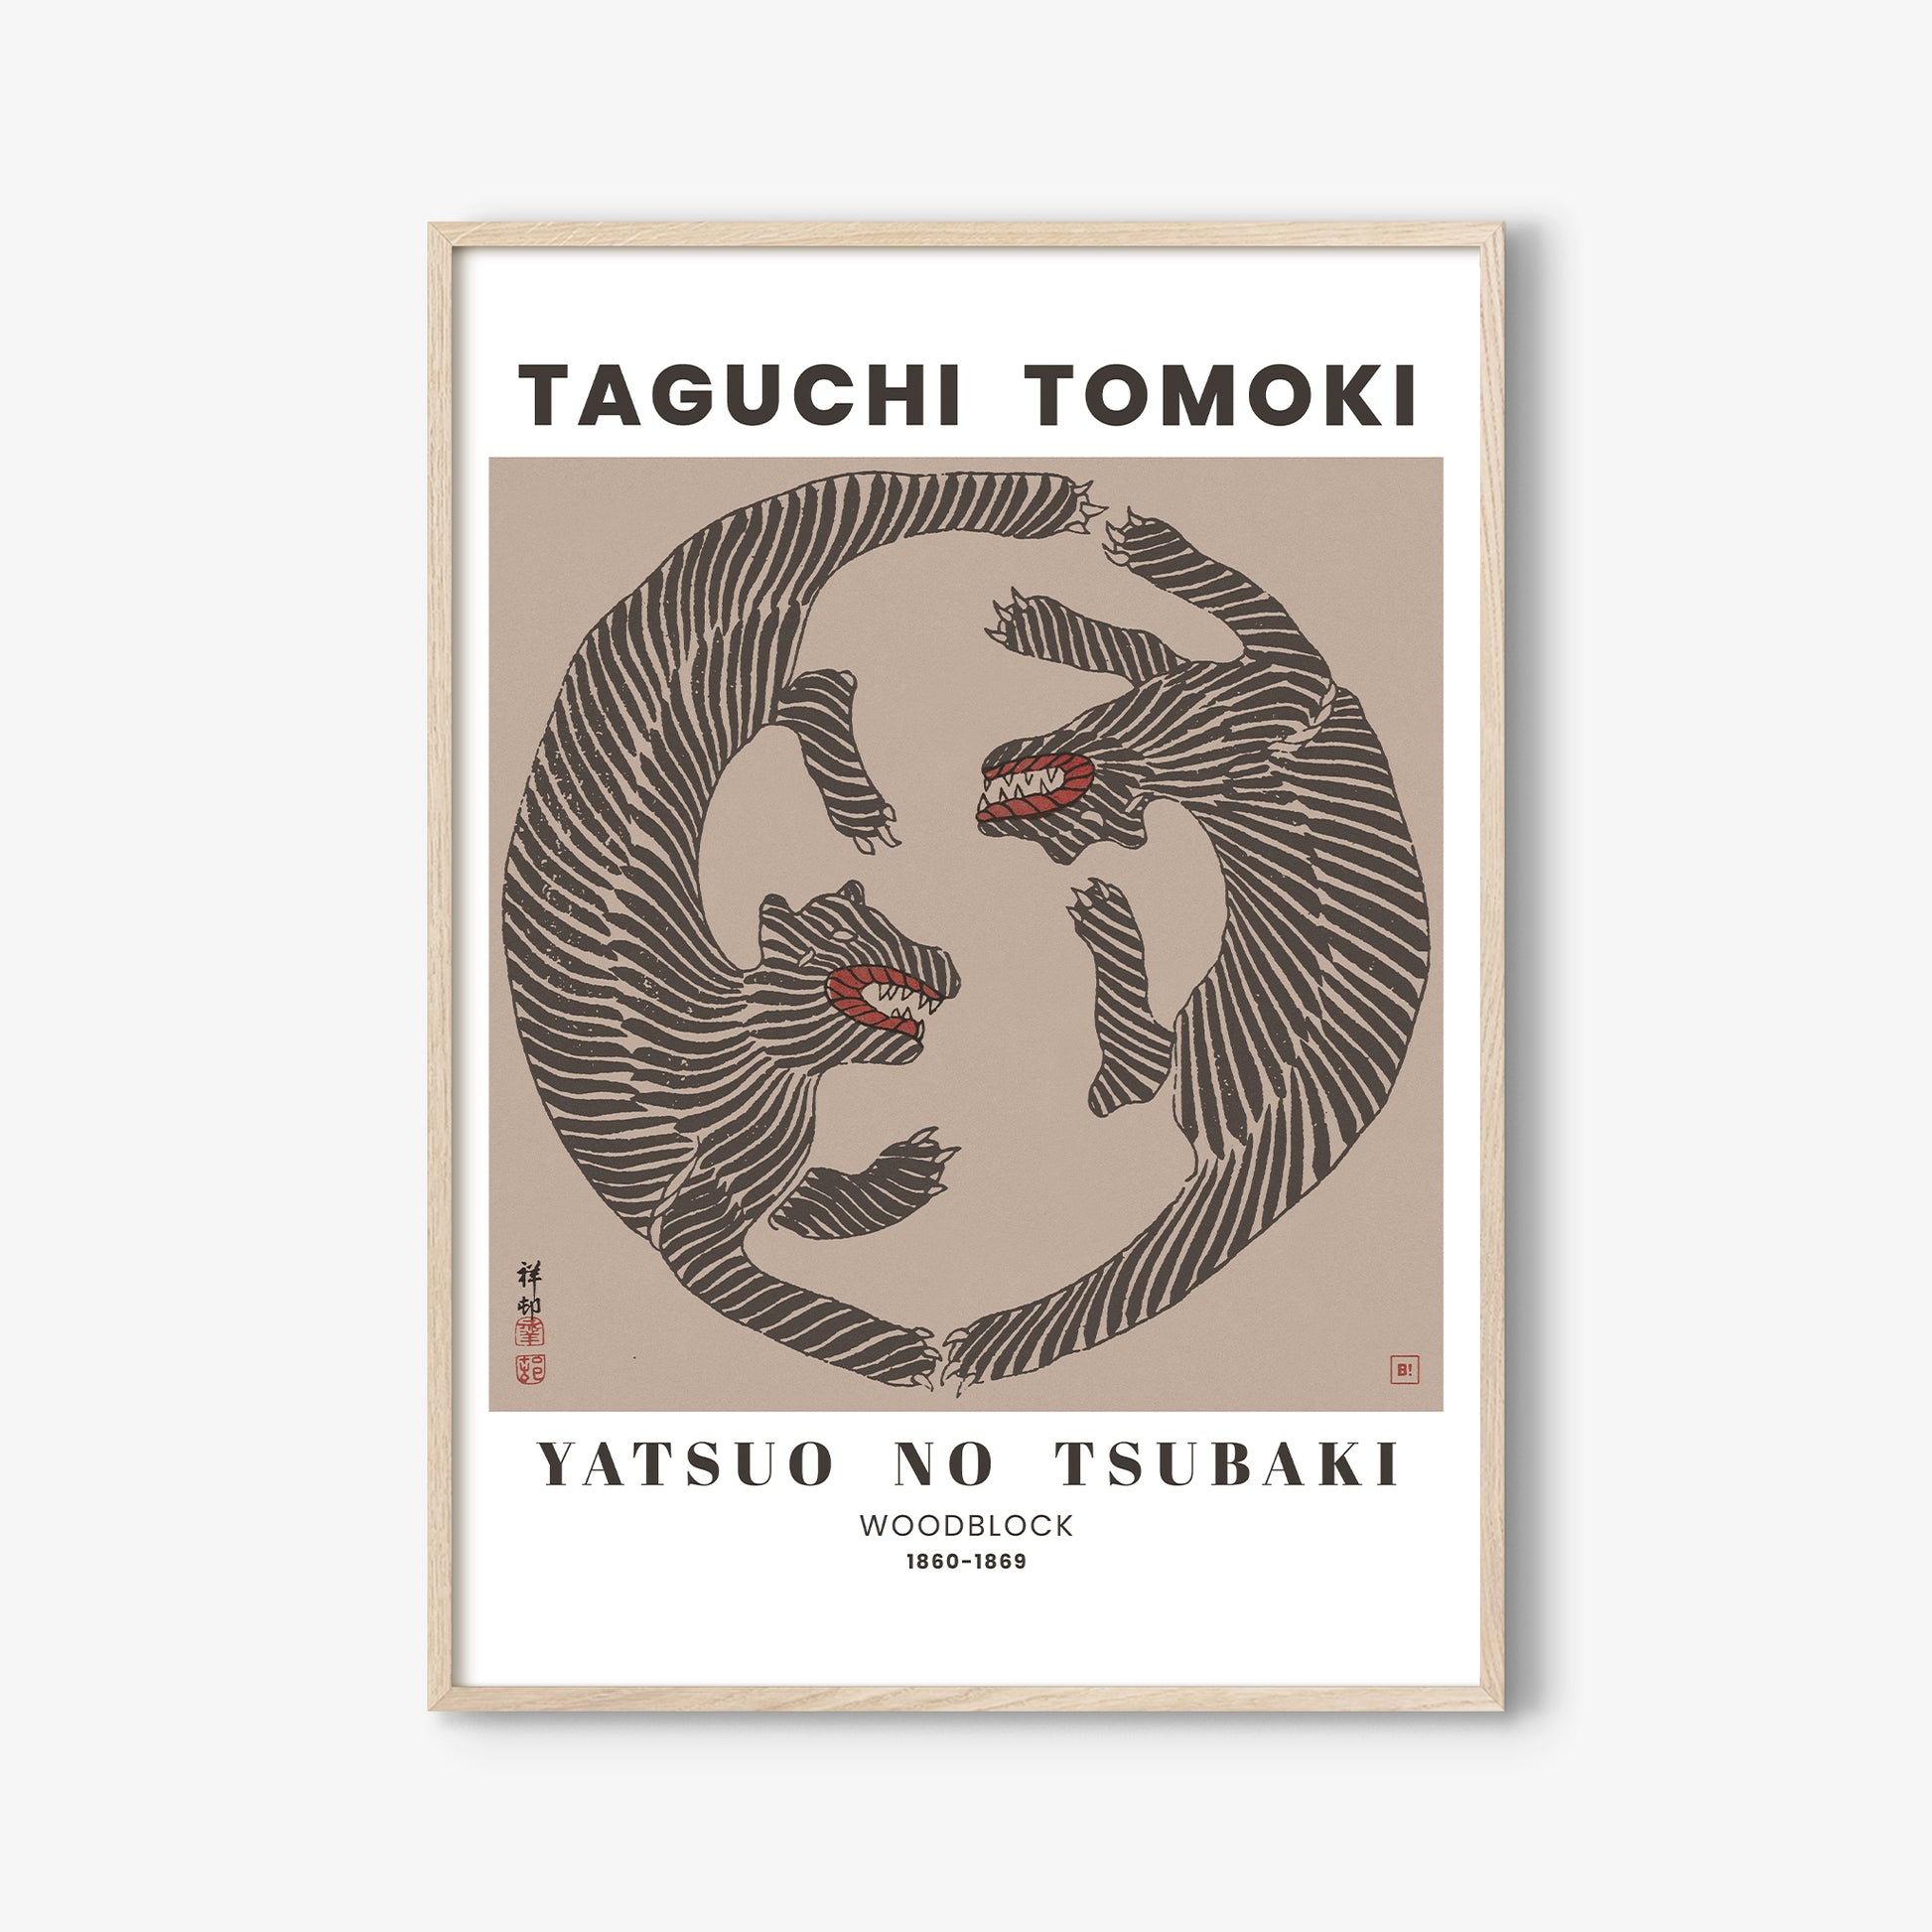 Be inspired by our remastered Taguchi Tomoki Woodblock Tigers Terracotta exhibition art print. This artwork was printed using the giclée process on archival acid-free paper and is presented in an light oak frame that captures its timeless beauty in every detail.